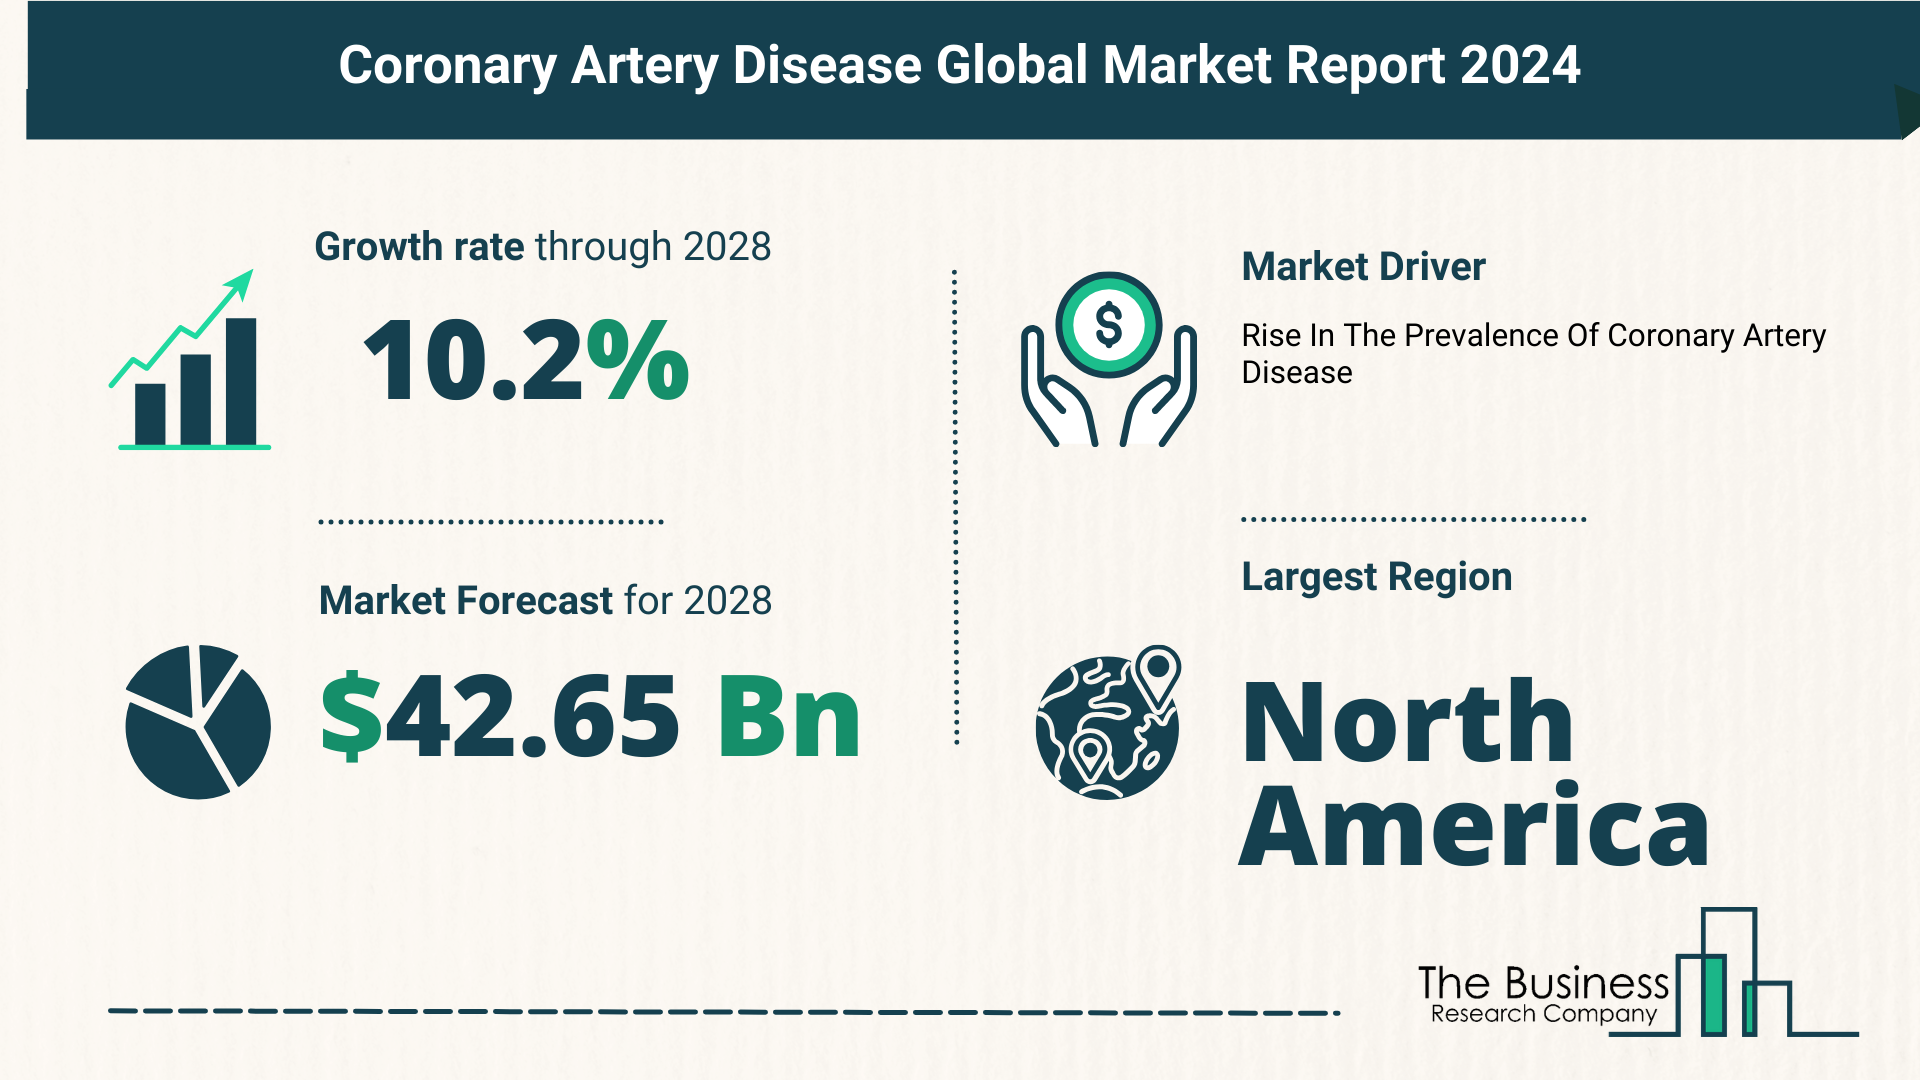 How Is The Coronary Artery Disease Market Expected To Grow Through 2024-2033